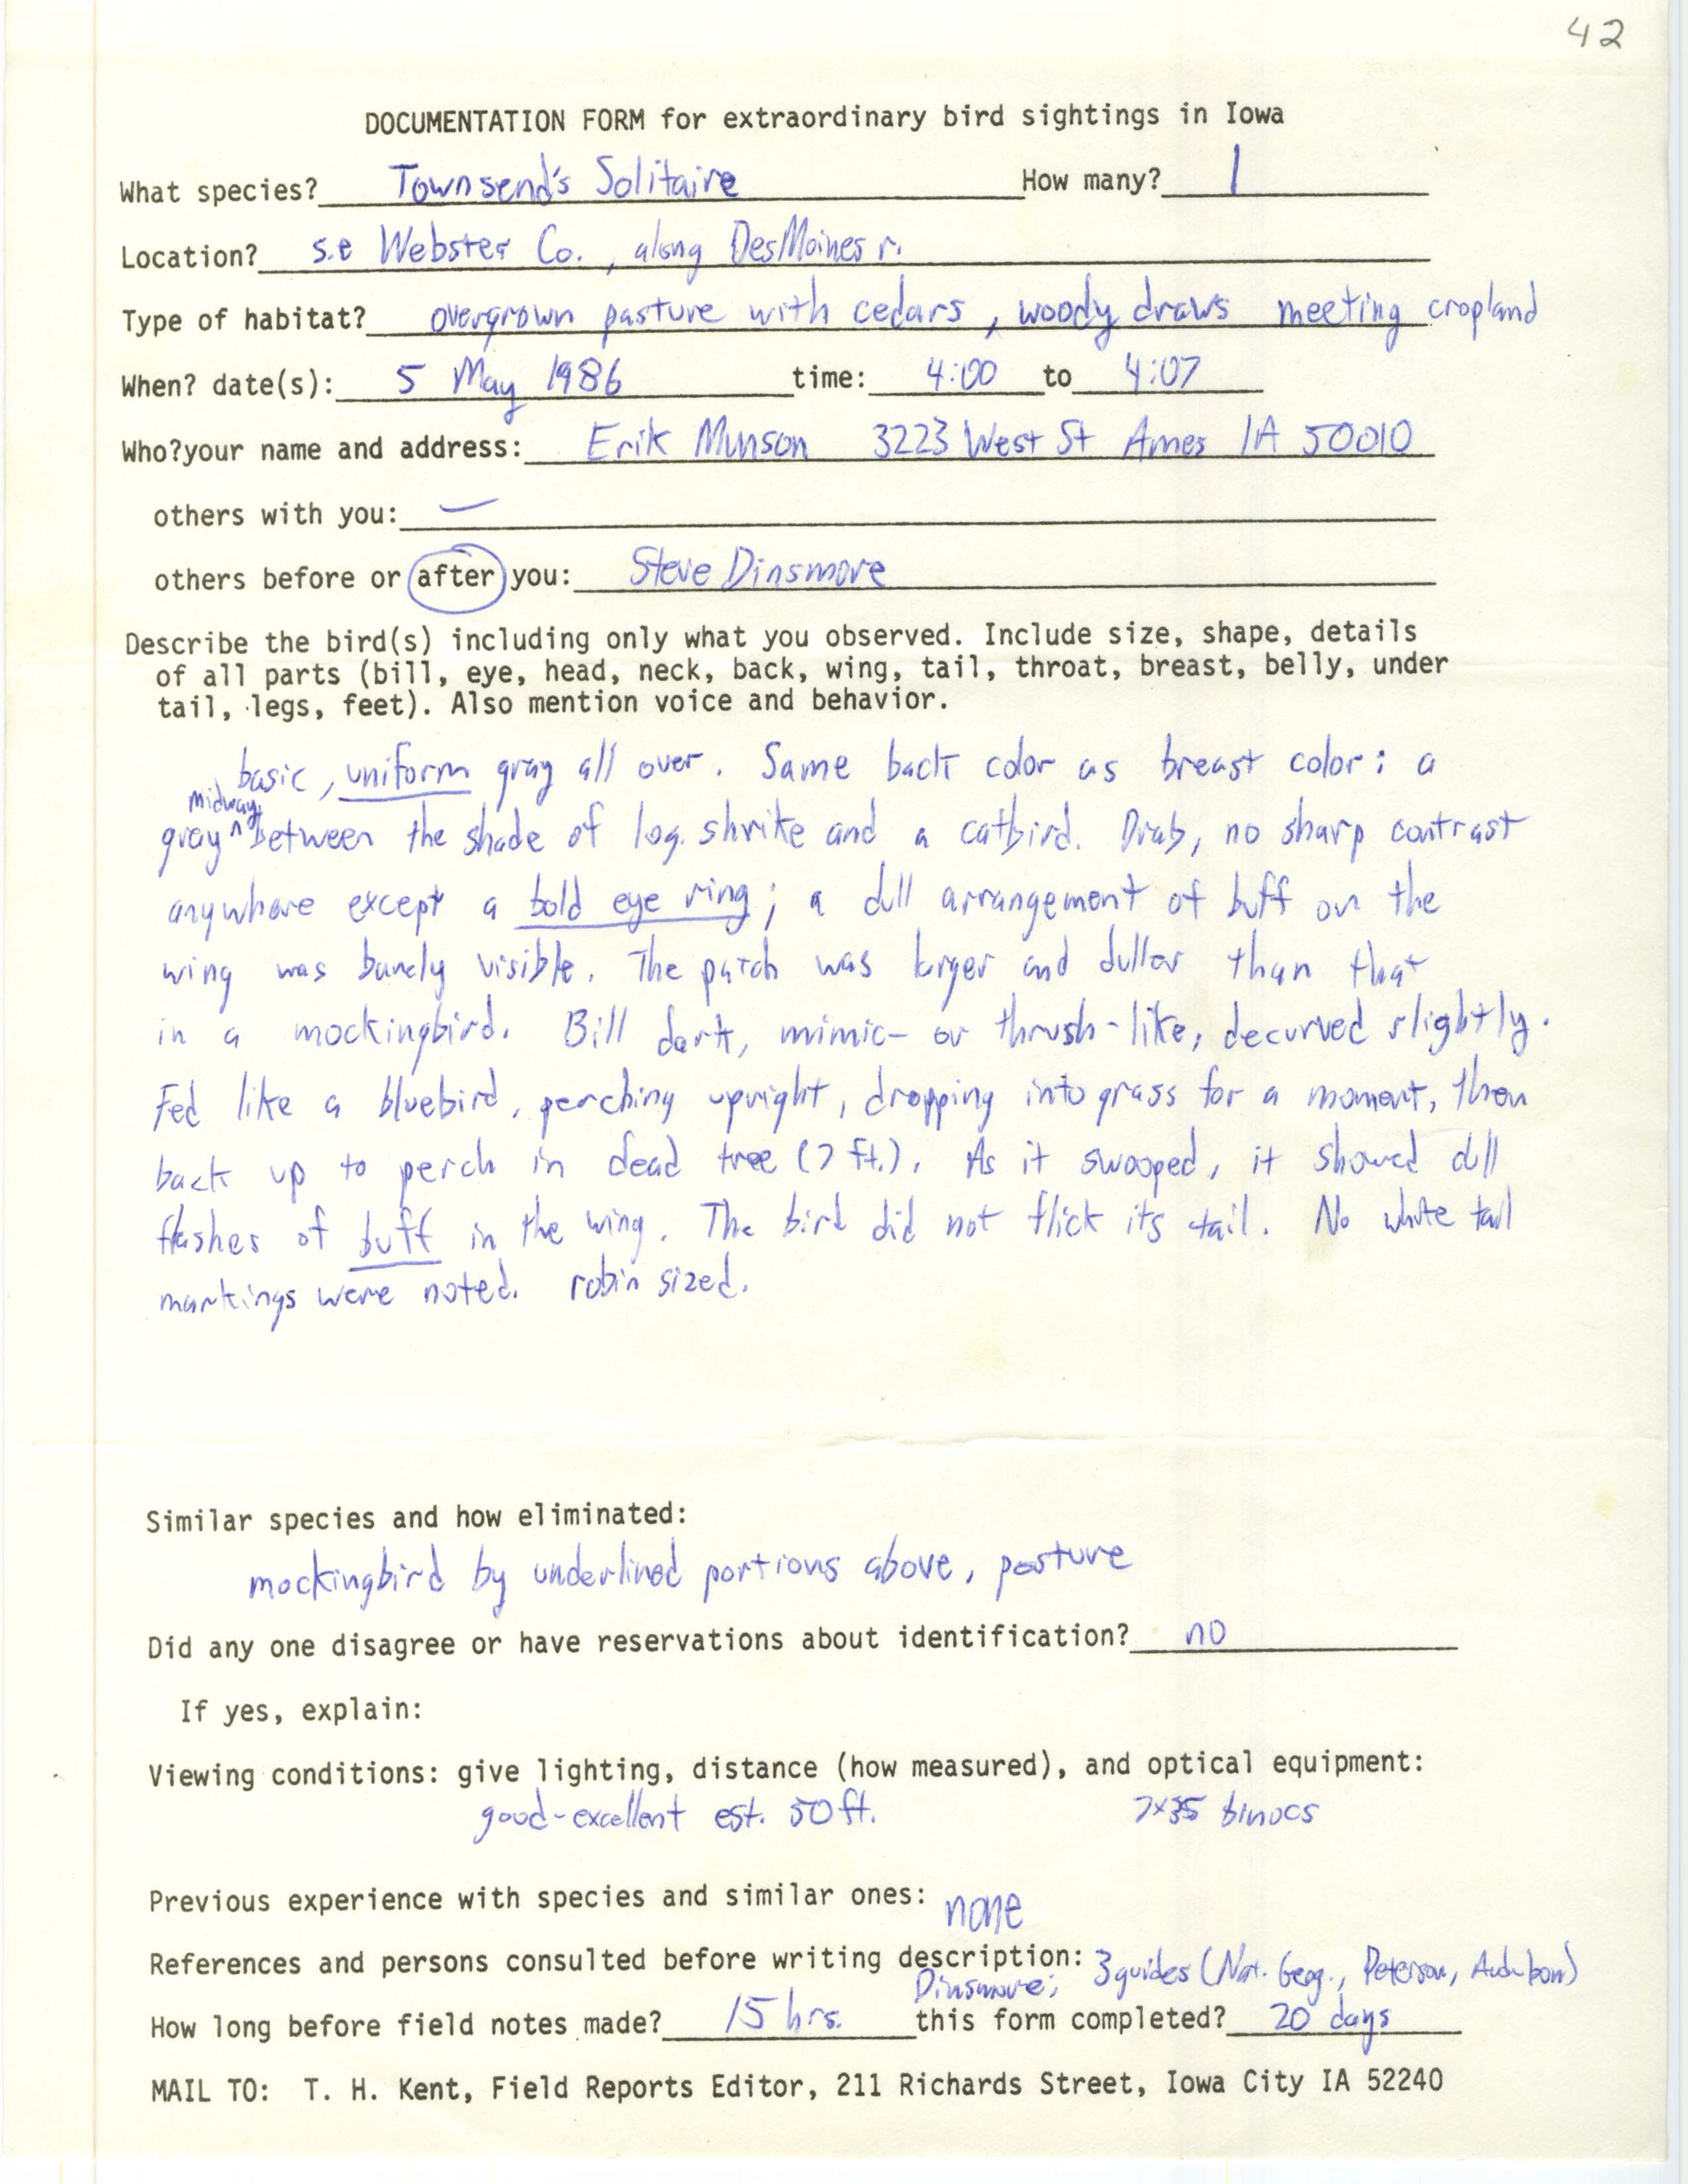 Rare bird documentation form for Townsend's Solitaire at southeastern Webster County, 1986